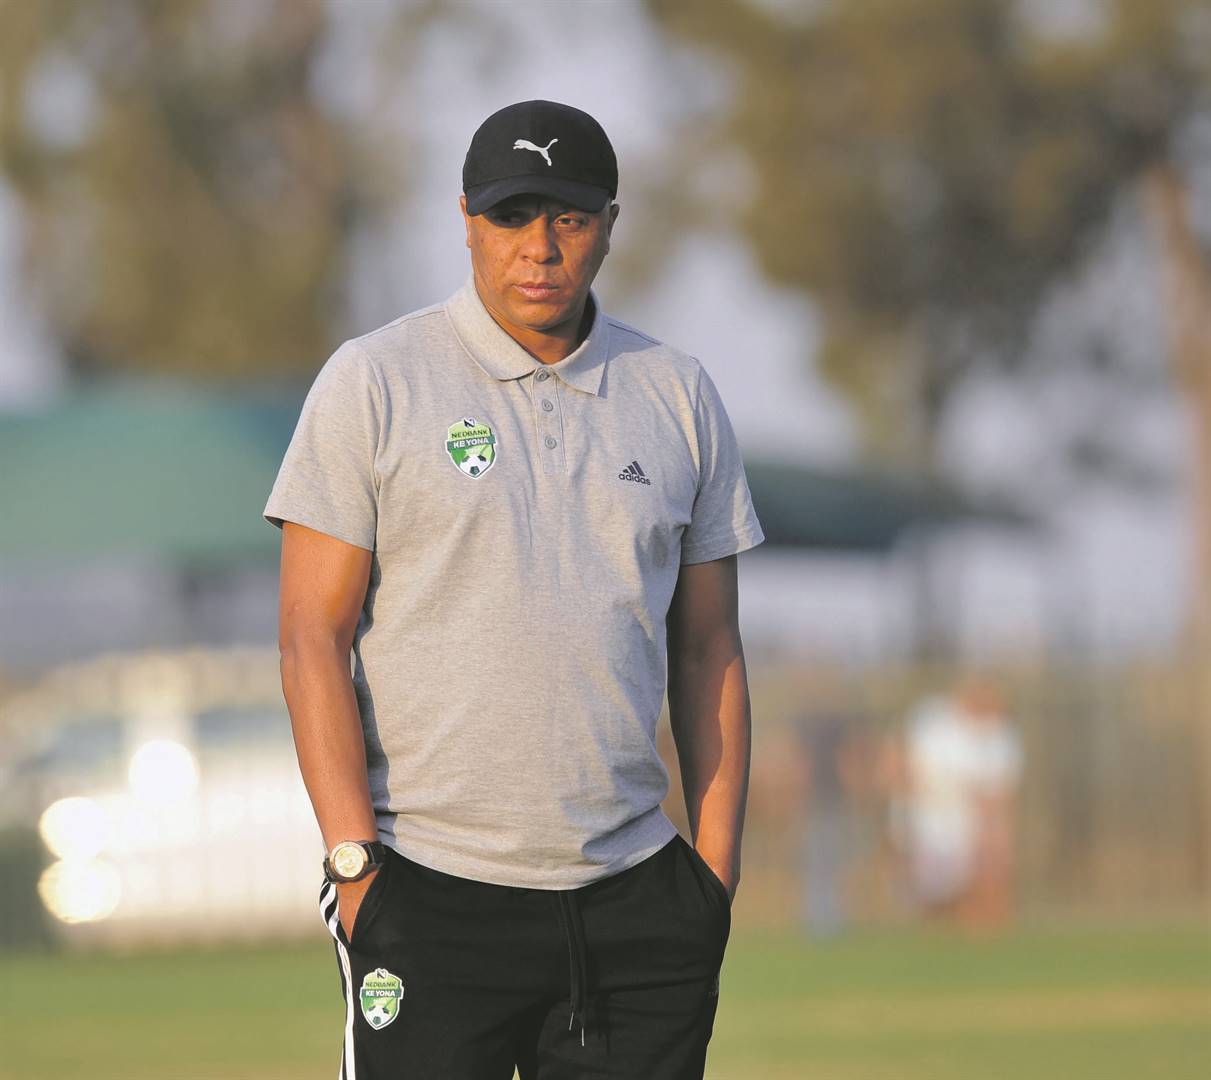 Doctor Khumalo has slammed Bafana Bafana coach Hugo Broos for ignoring experienced players in his team selection. Photo by BackpagePix